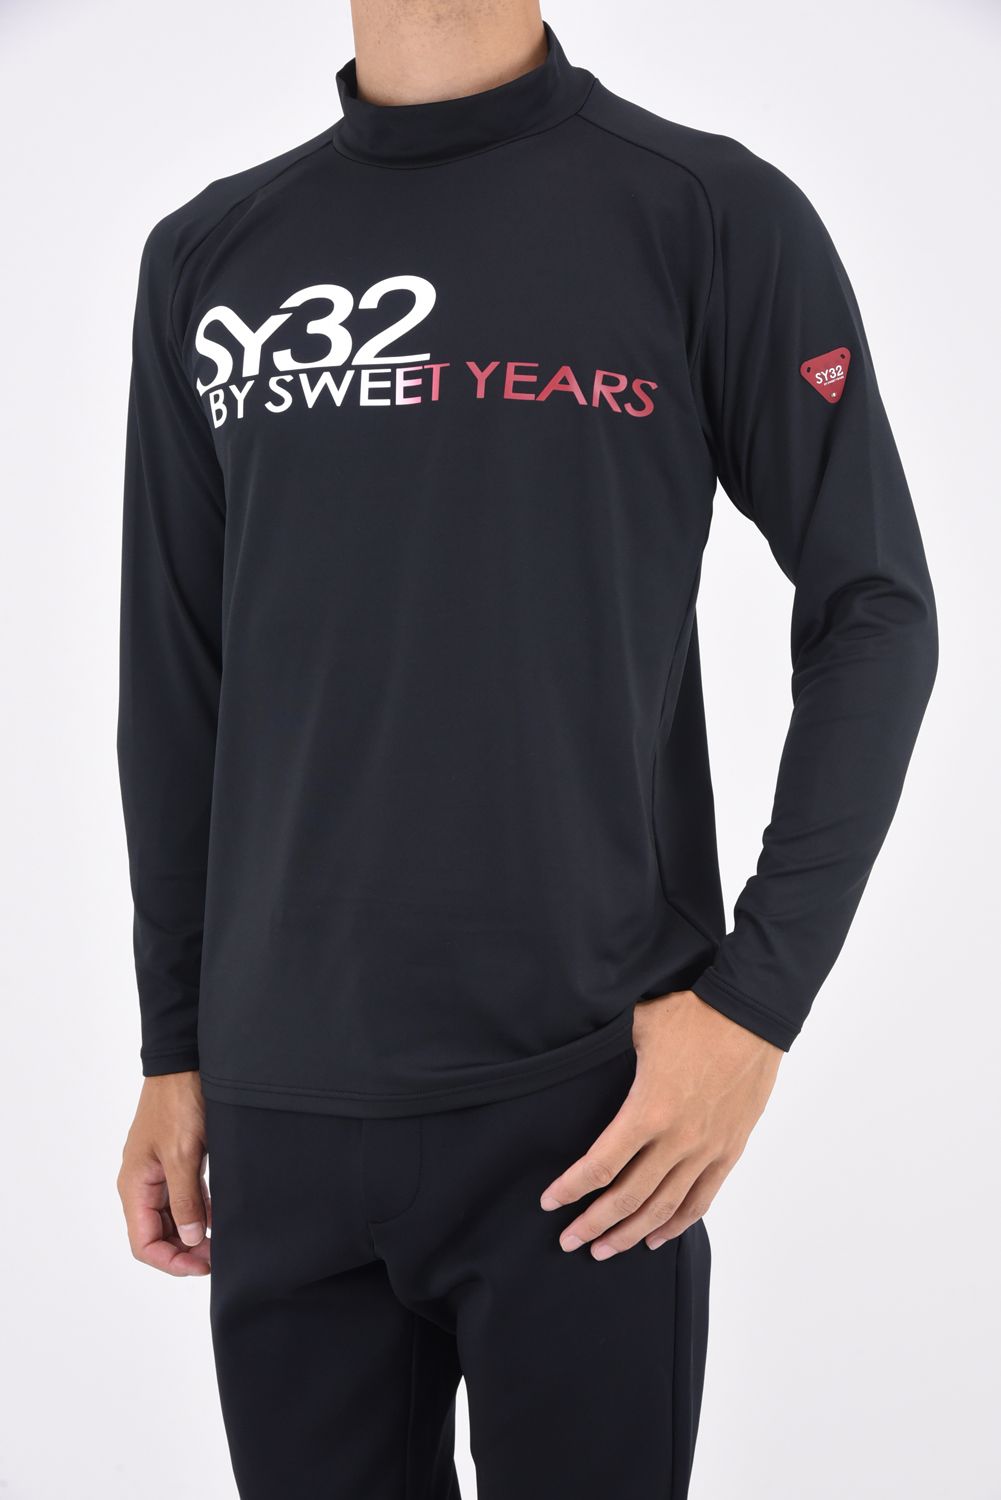 SY32 by SWEET YEARS GOLF - STRETCH MOCK NECK SHIRTS / フロントロゴ